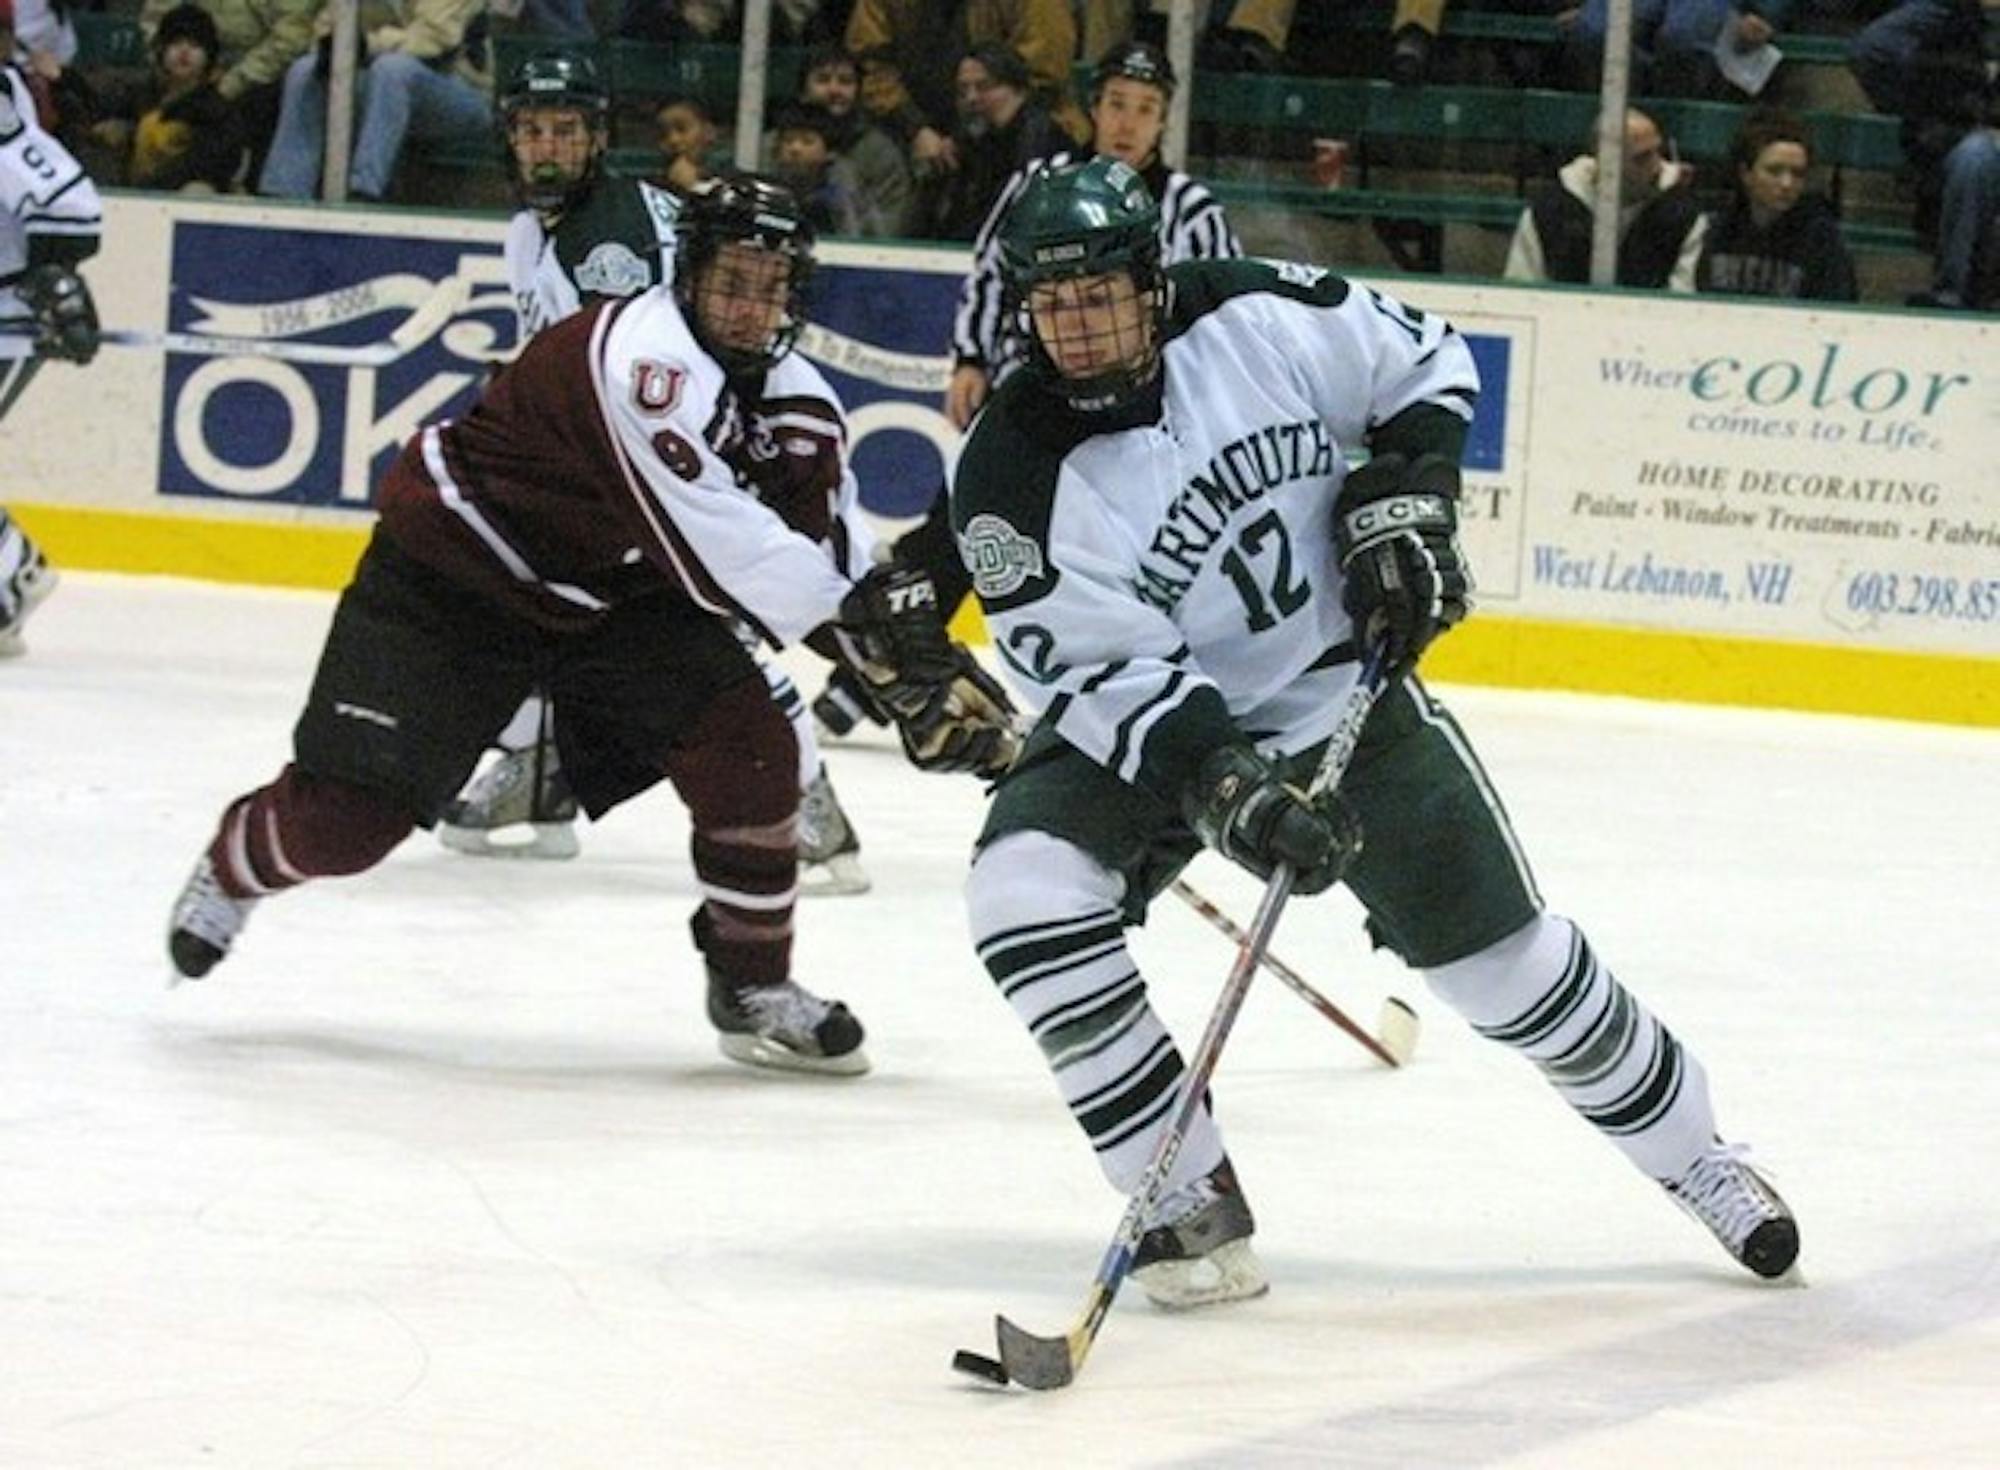 Ben Lovejoy '06 will help anchor the Big Green defense in 2006-07.